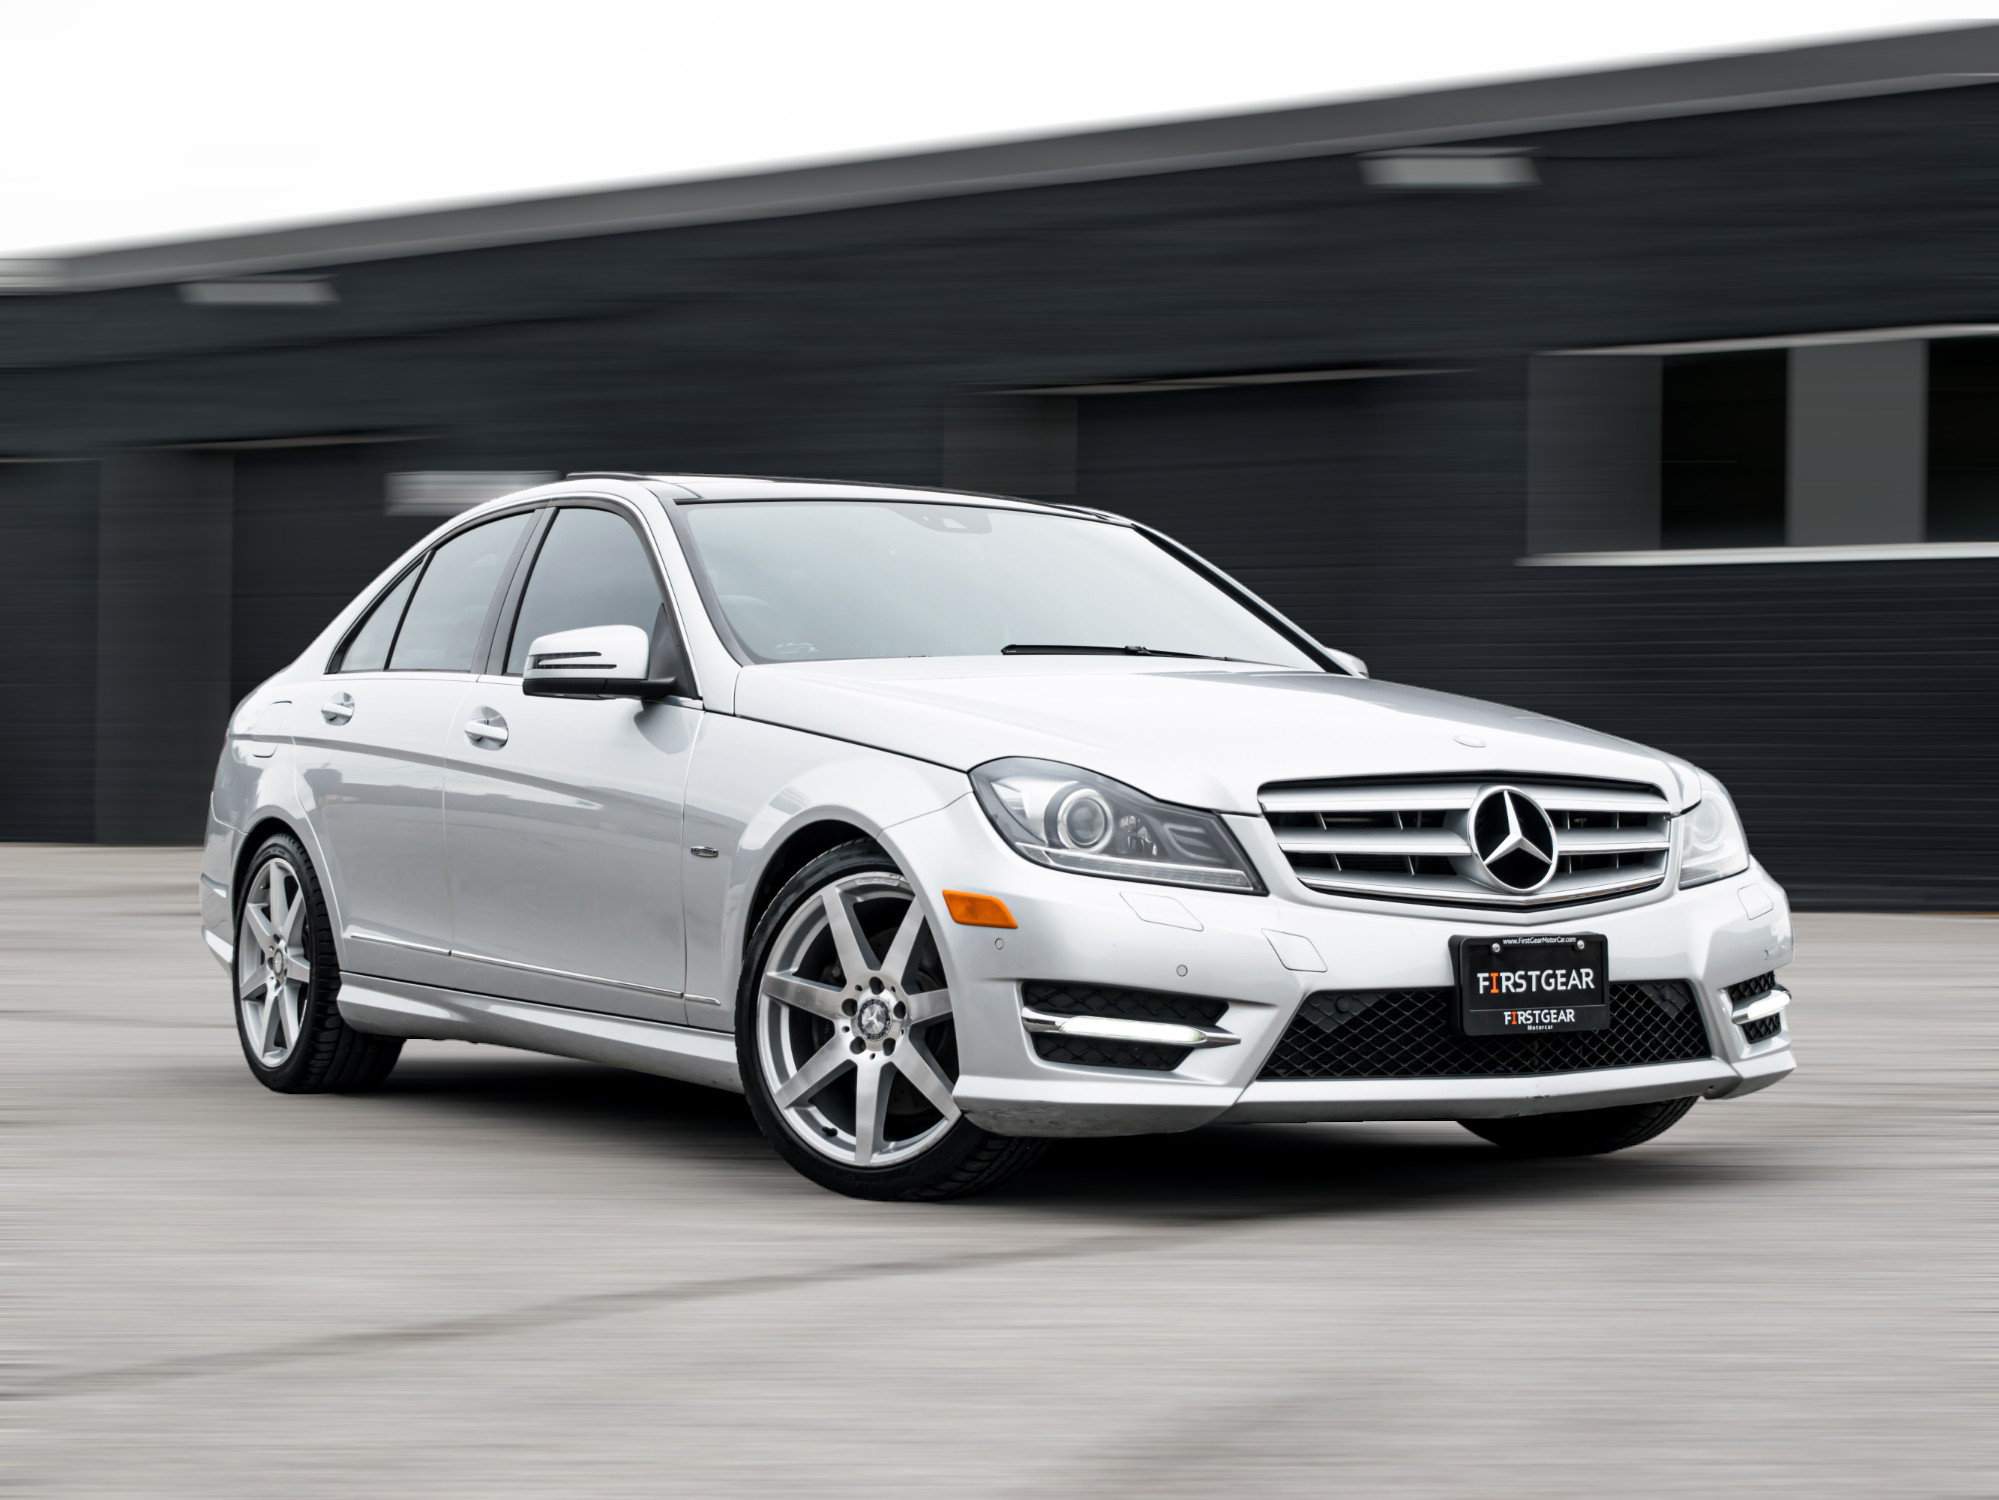 2012 Mercedes-Benz C-Class C 350 I 4MATIC I NAV I LOW KM I PRICE TO SELL